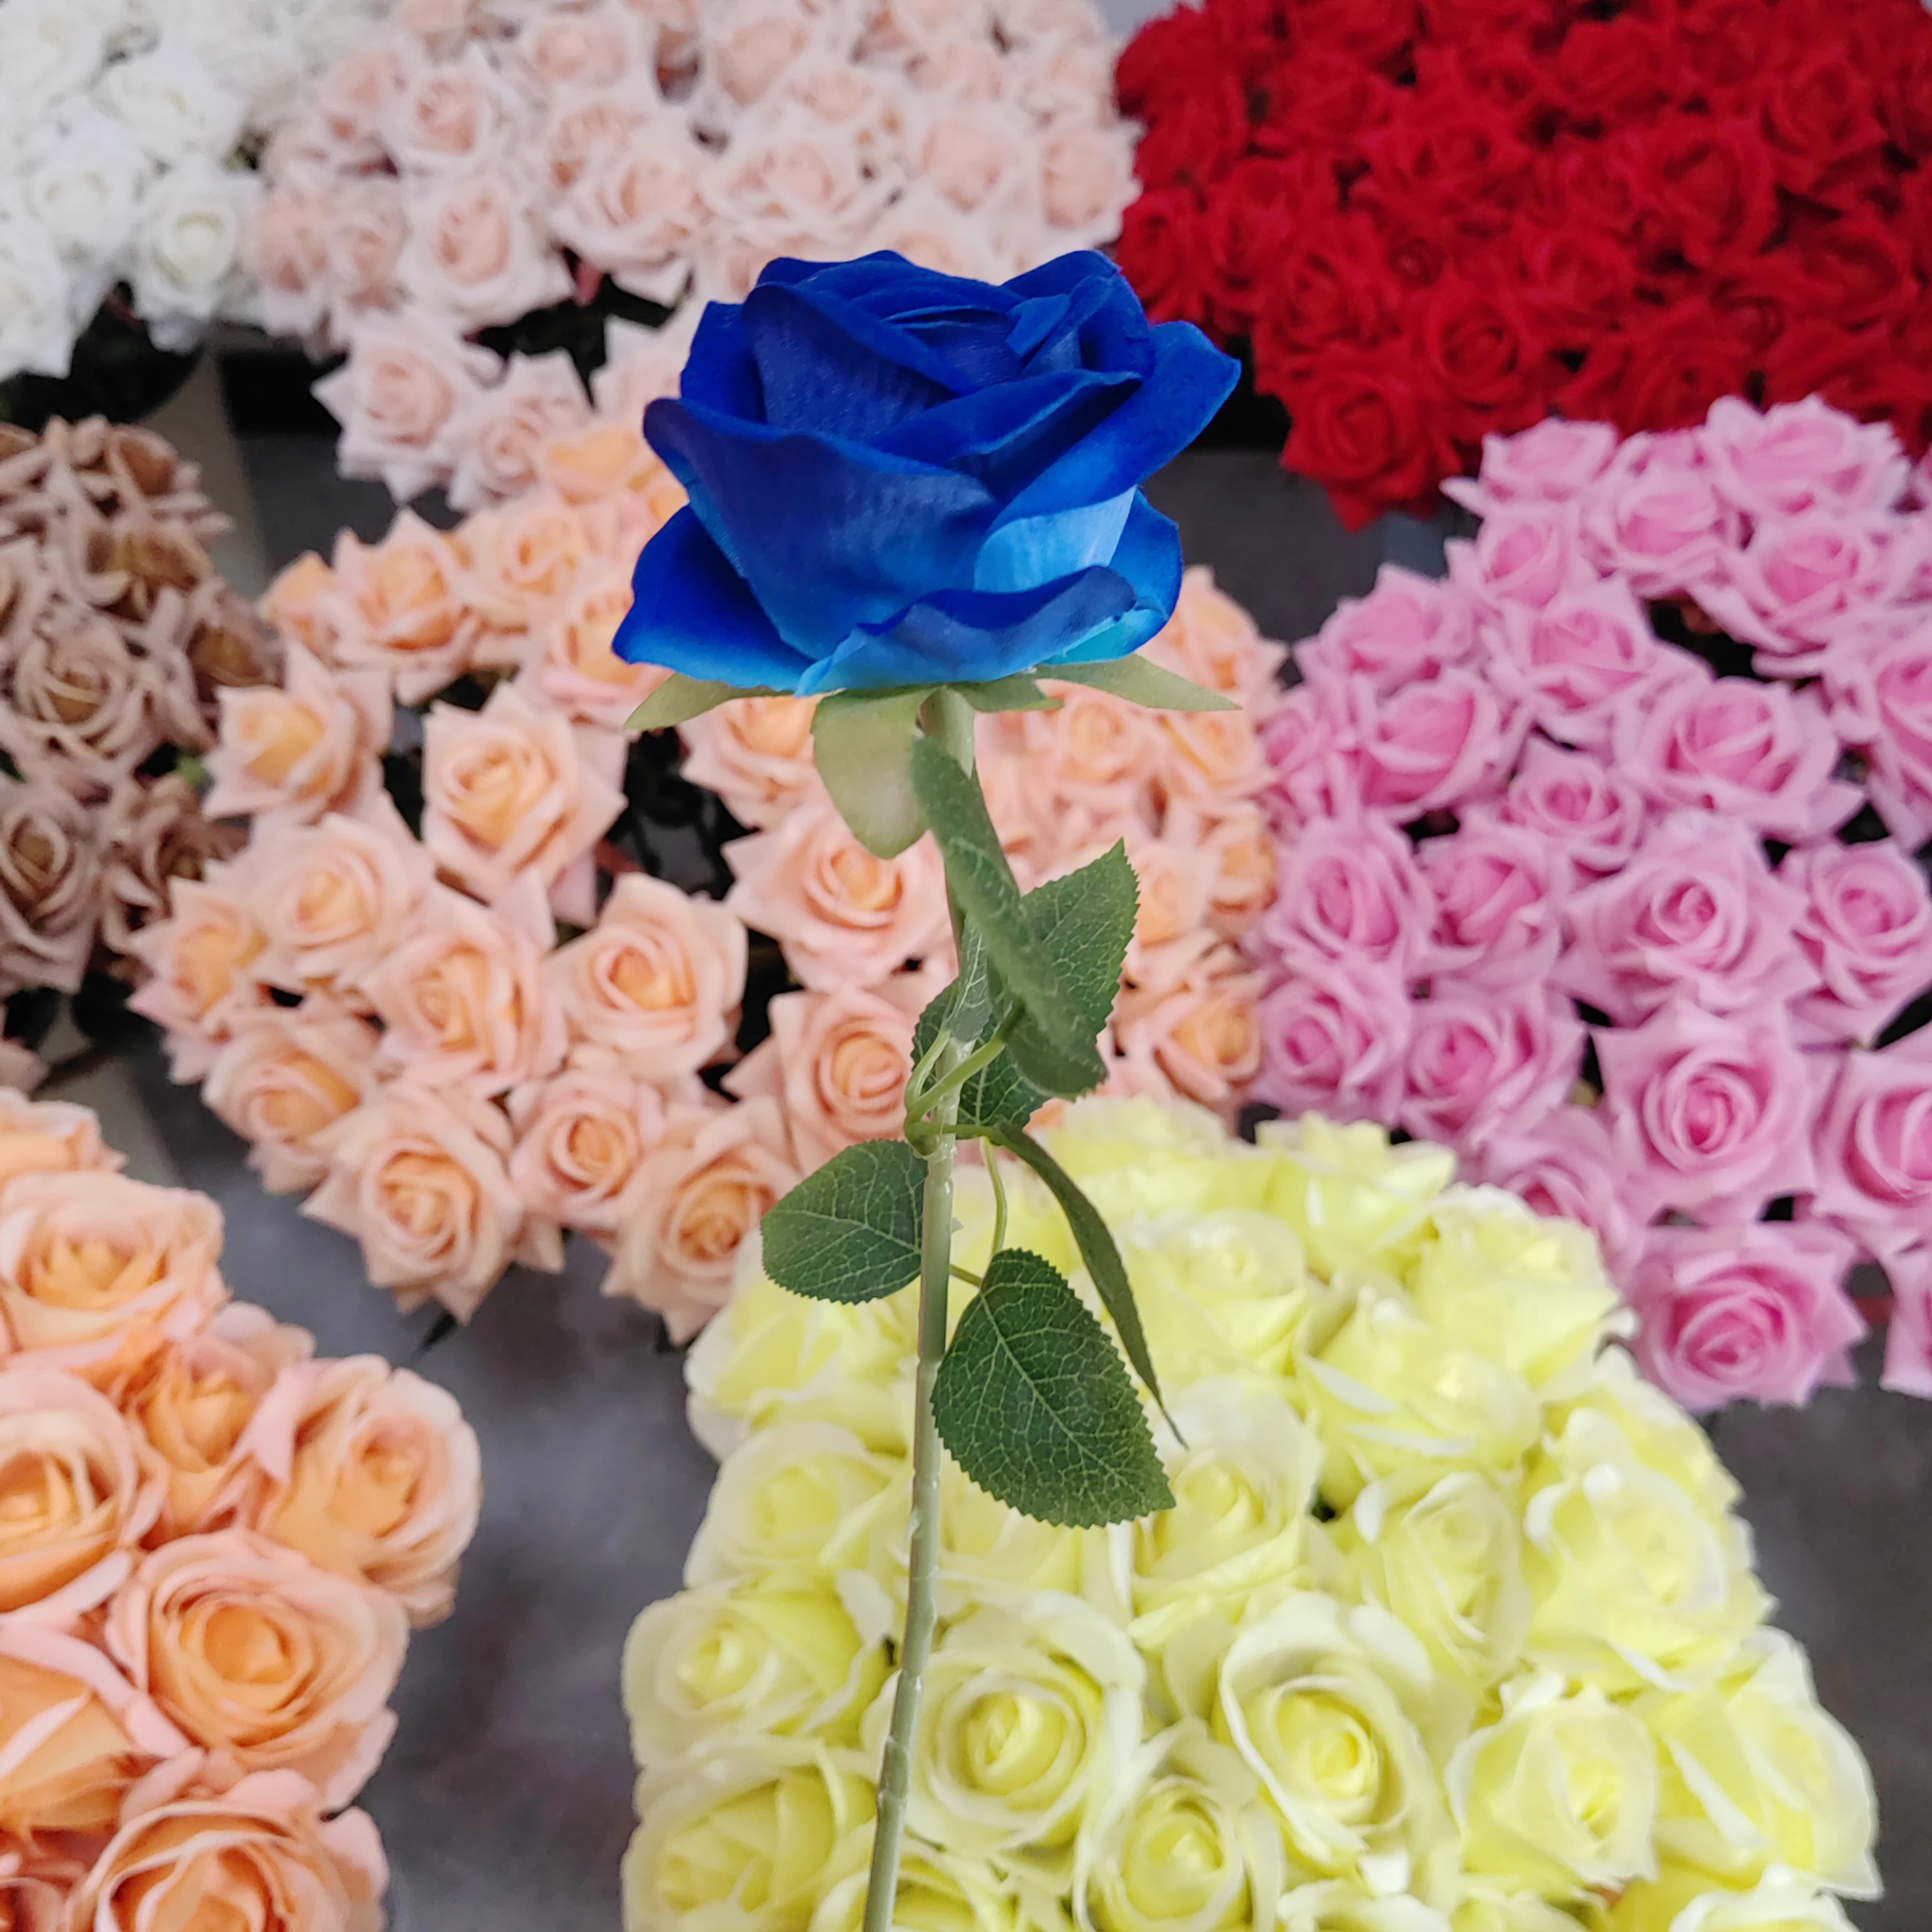 Factory Hot Sale Valentine's Day Gift Blue Roses Single Real Touch Silk Artificial Rose Decorative Flowers For Wedding